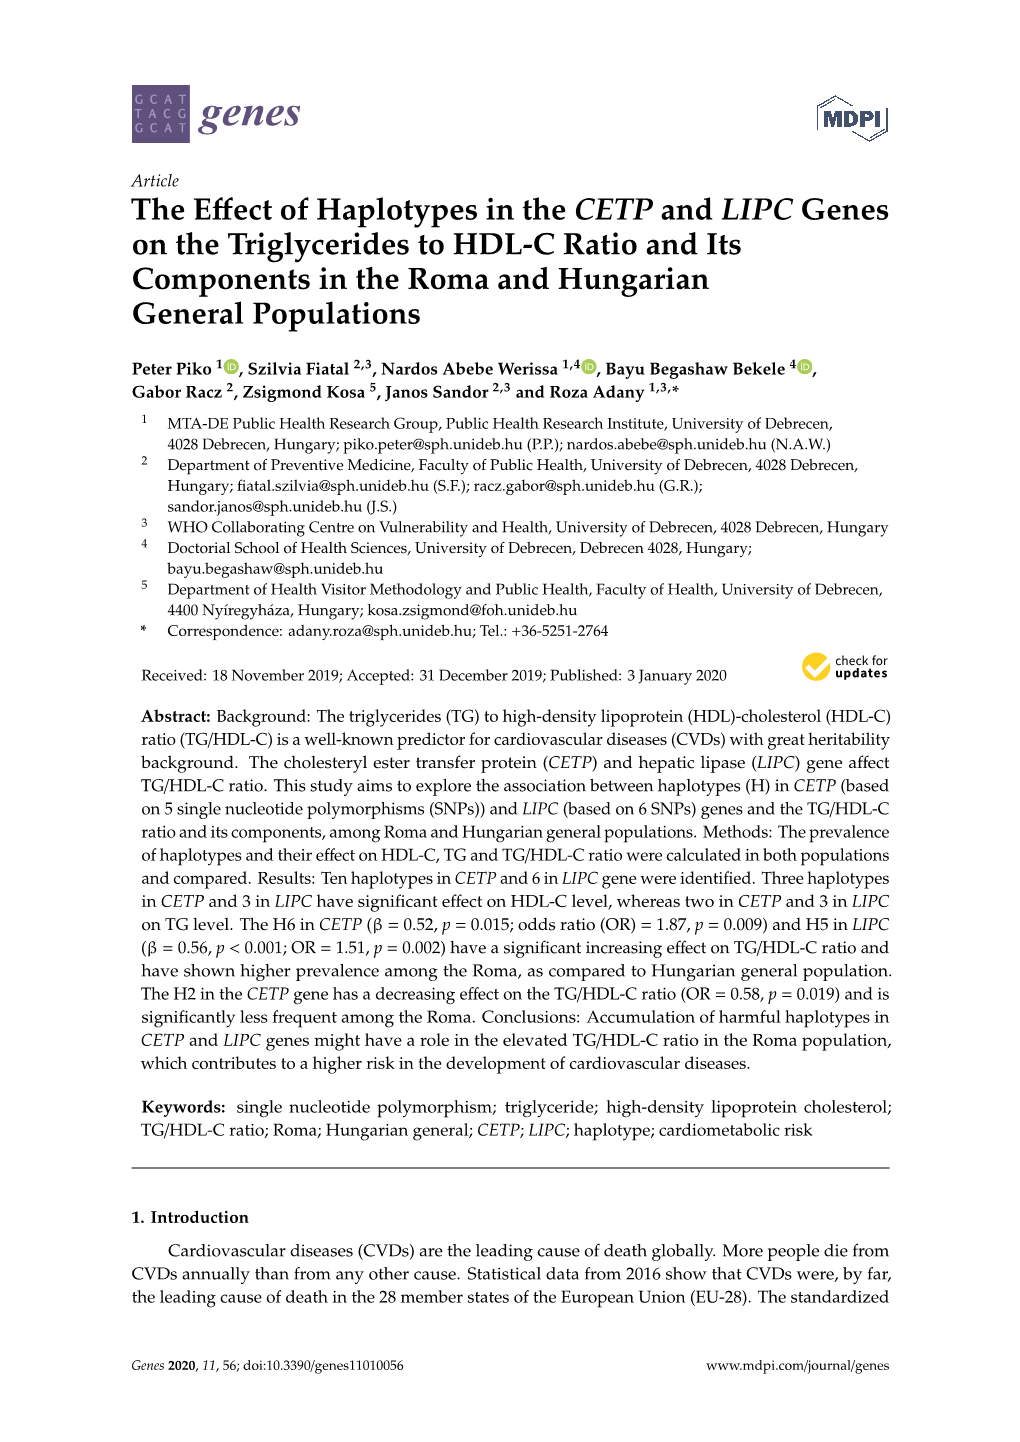 The Effect of Haplotypes in the CETP and LIPC Genes on The